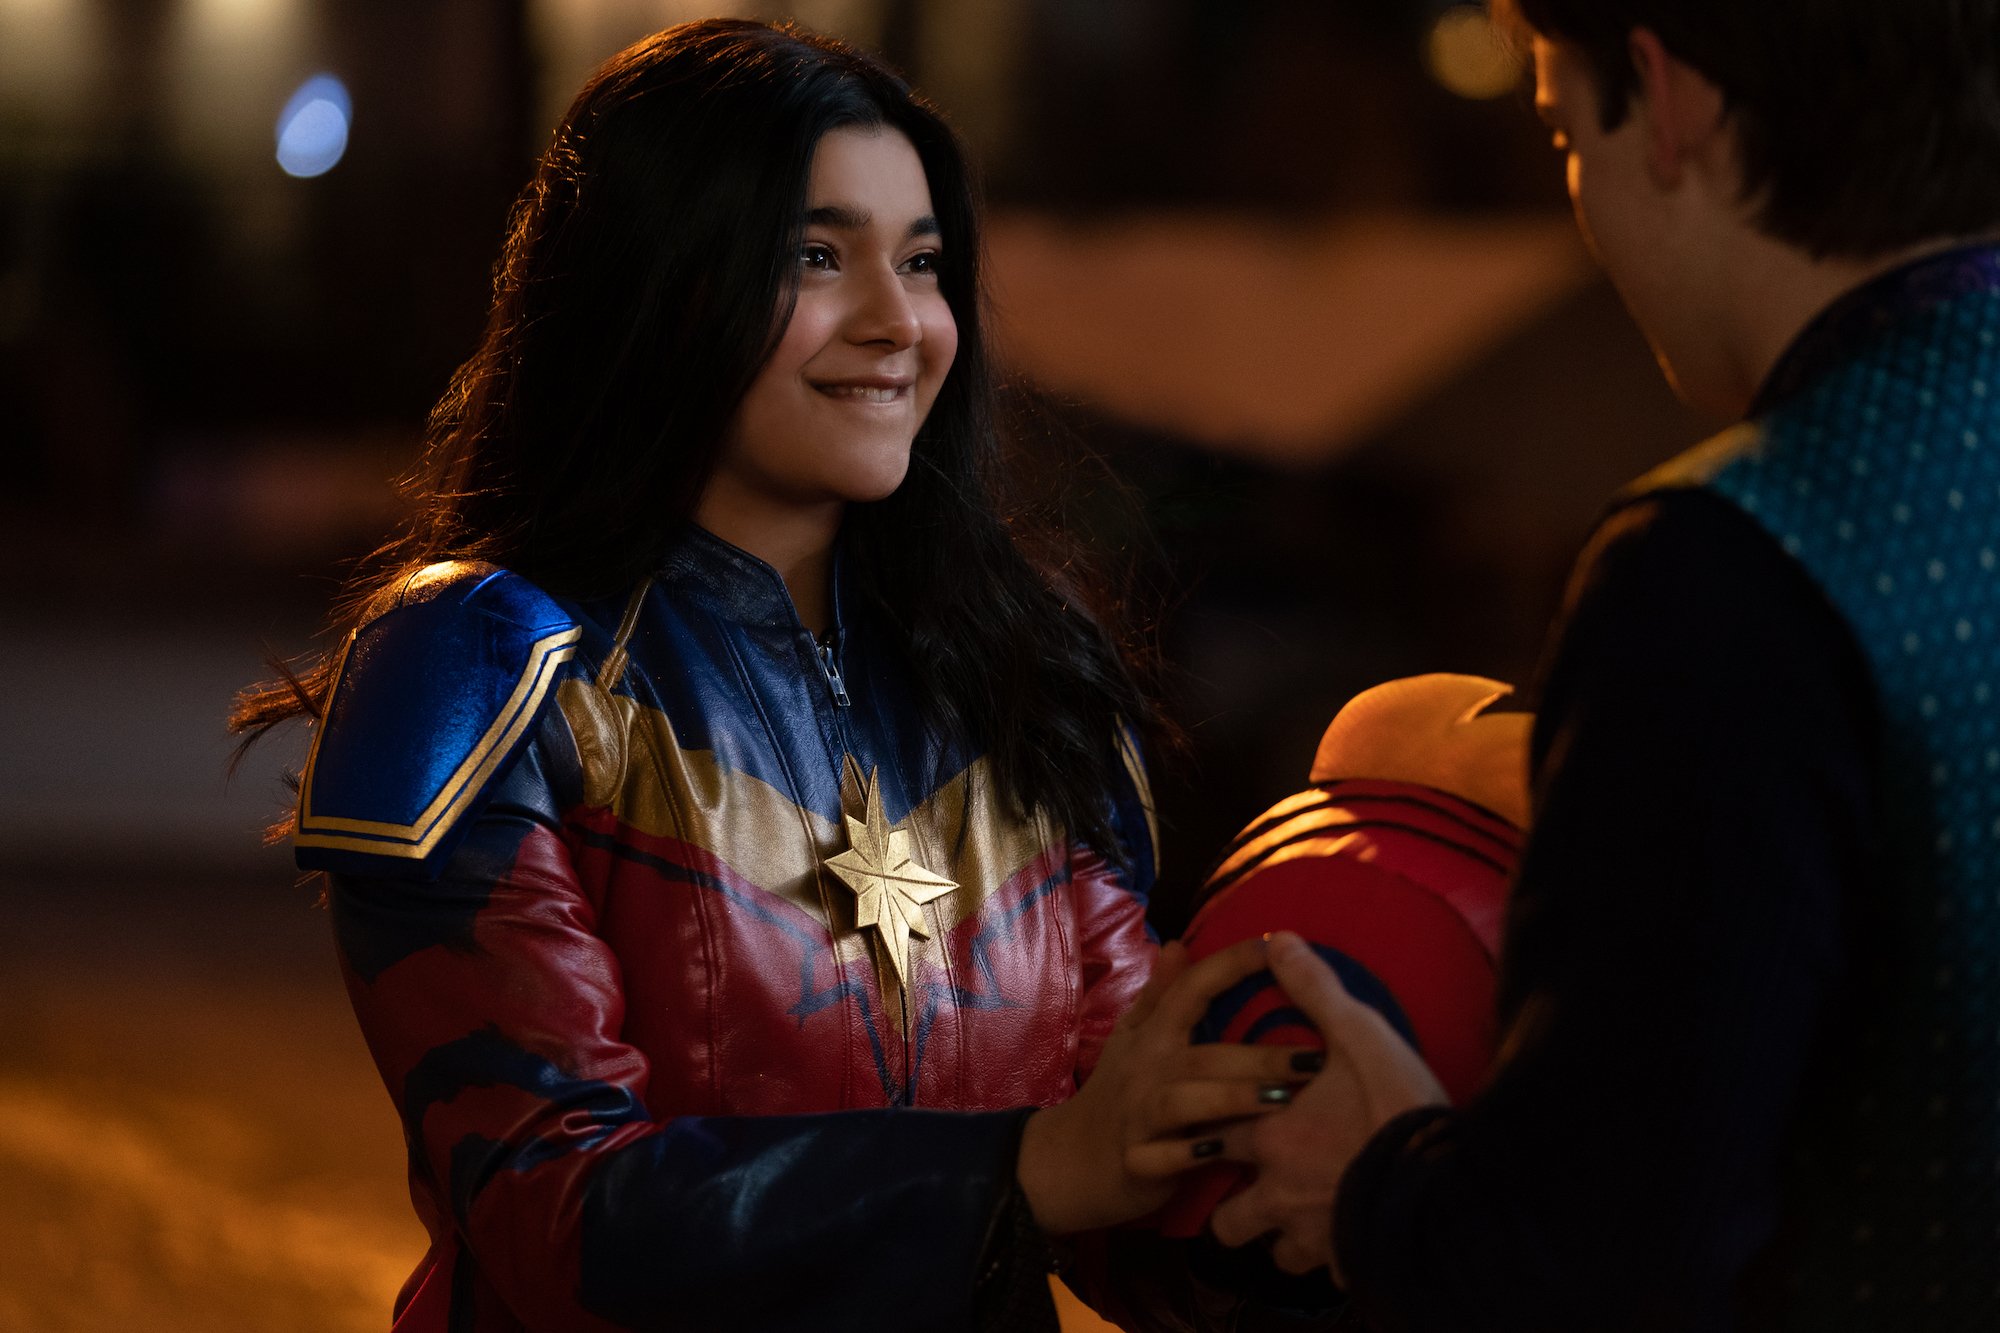 Iman Vellani as Kamala Khan in 'Ms. Marvel,' which fans want greenlit for season 2. She's wearing a red, blue, and gold suit, holding a helmet, and smiling at Bruno (Matt Lintz).